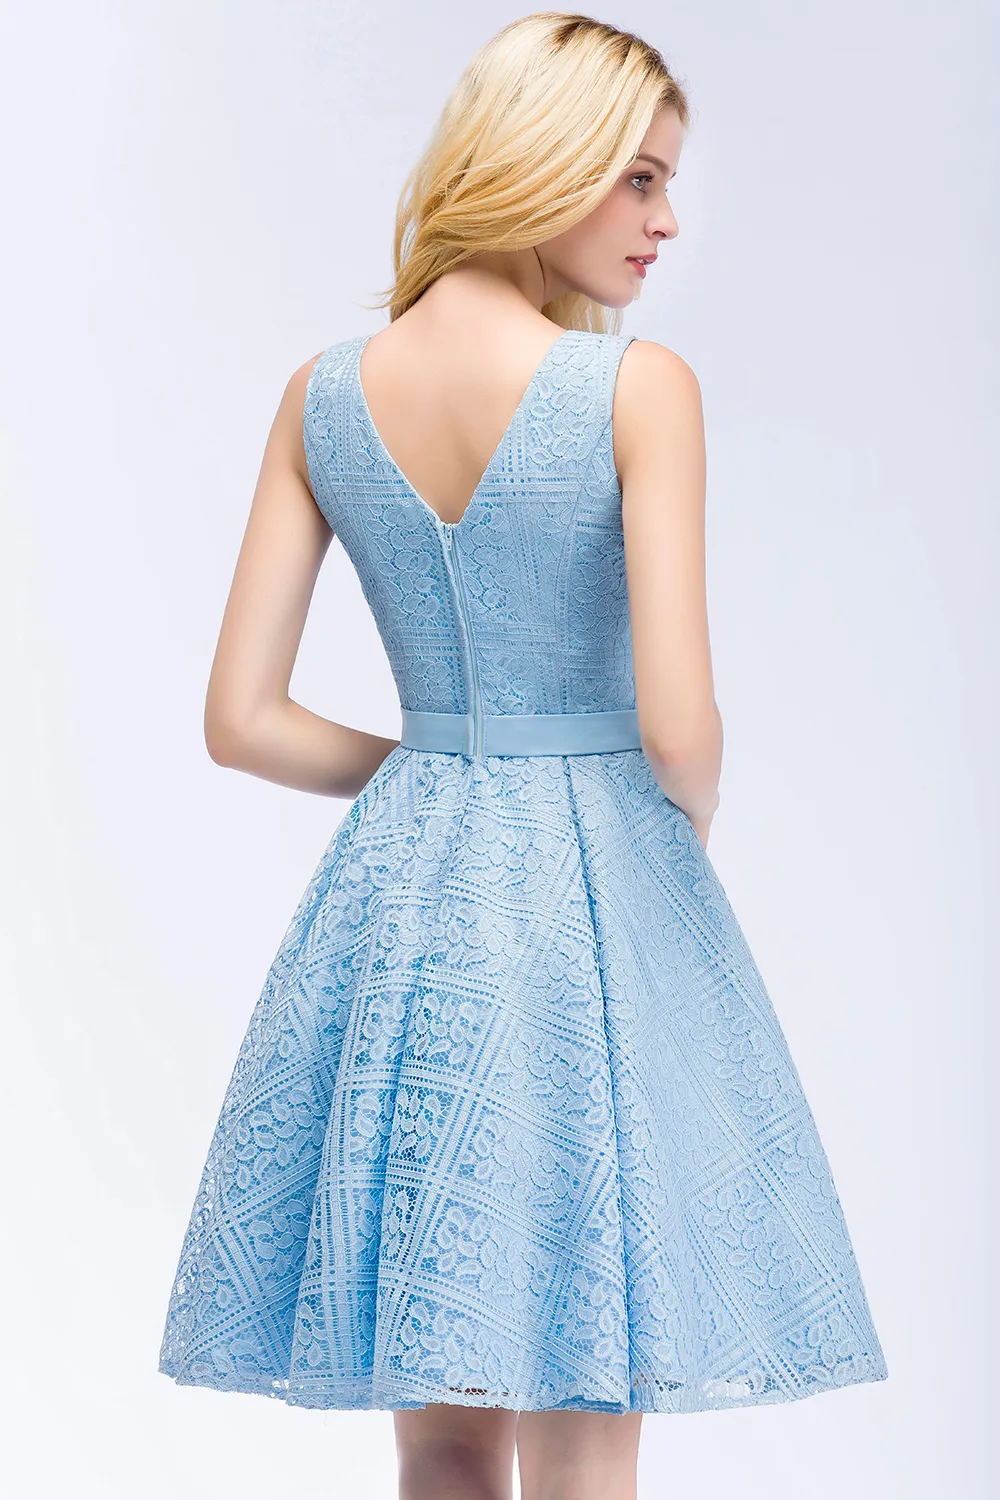 Light Sky Blue Lace Homecoming Dresses V Neck Short A Line Formal Party Cocktial Prom Dresses CPS916